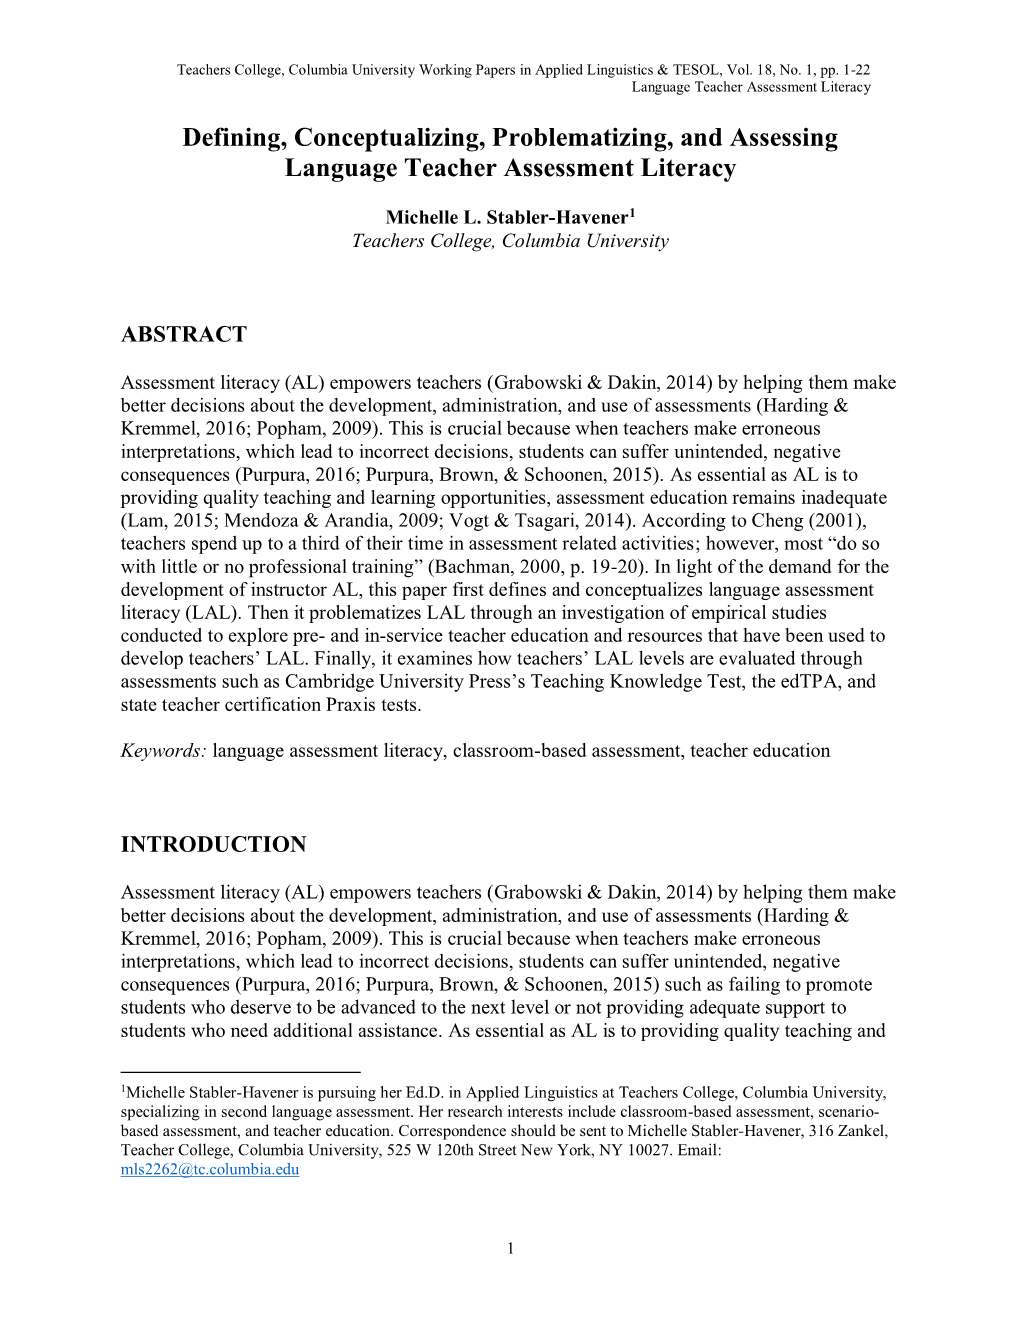 Defining, Conceptualizing, Problematizing, and Assessing Language Teacher Assessment Literacy